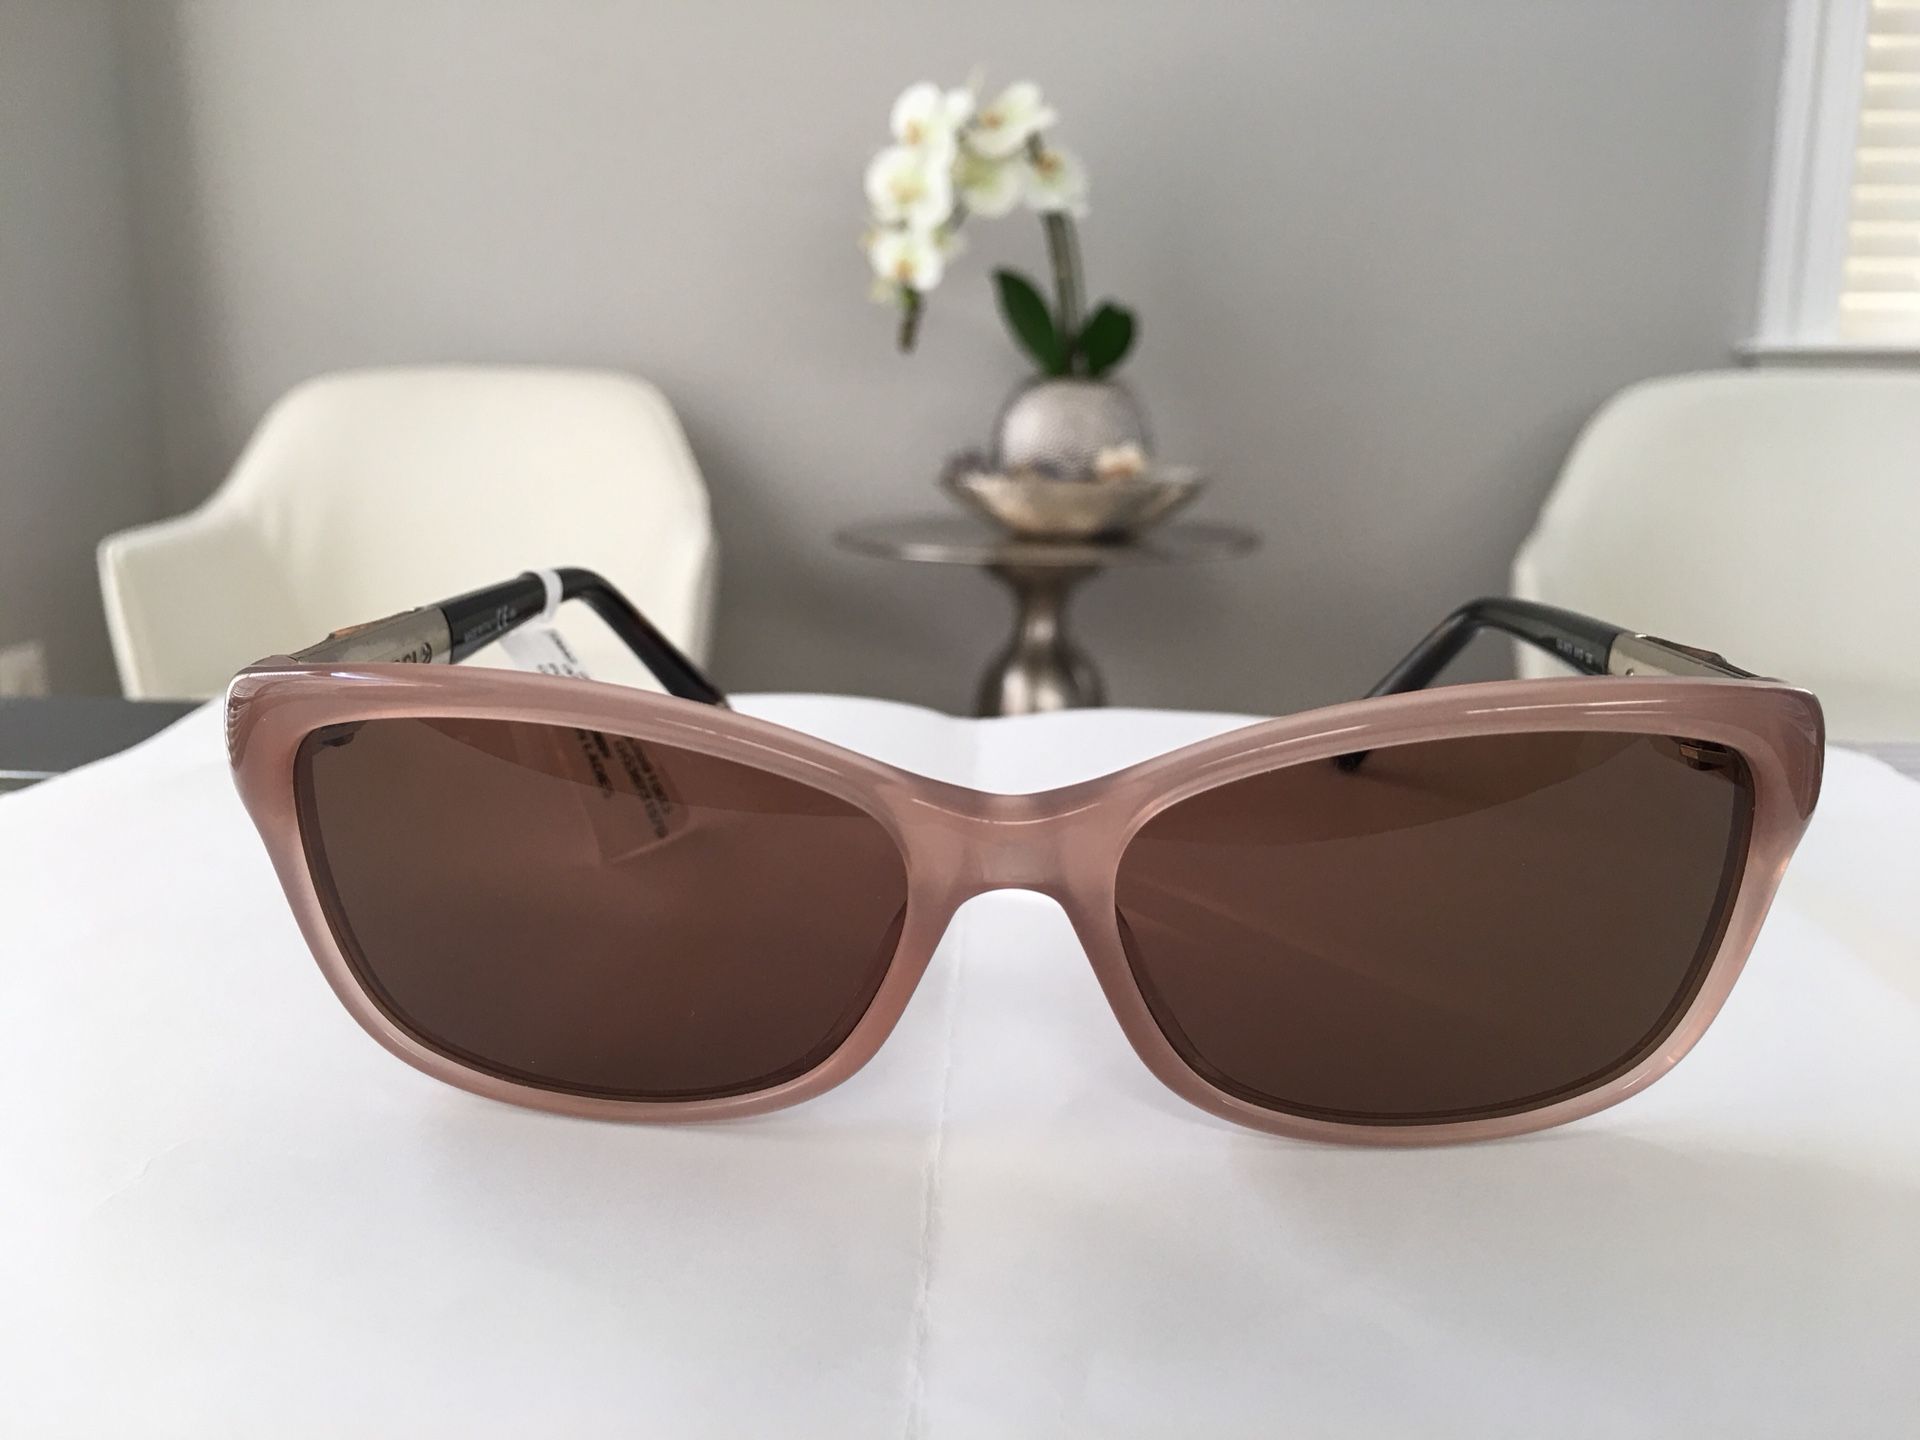 Gucci Sunglasses-Made in Italy- Brand New!!!